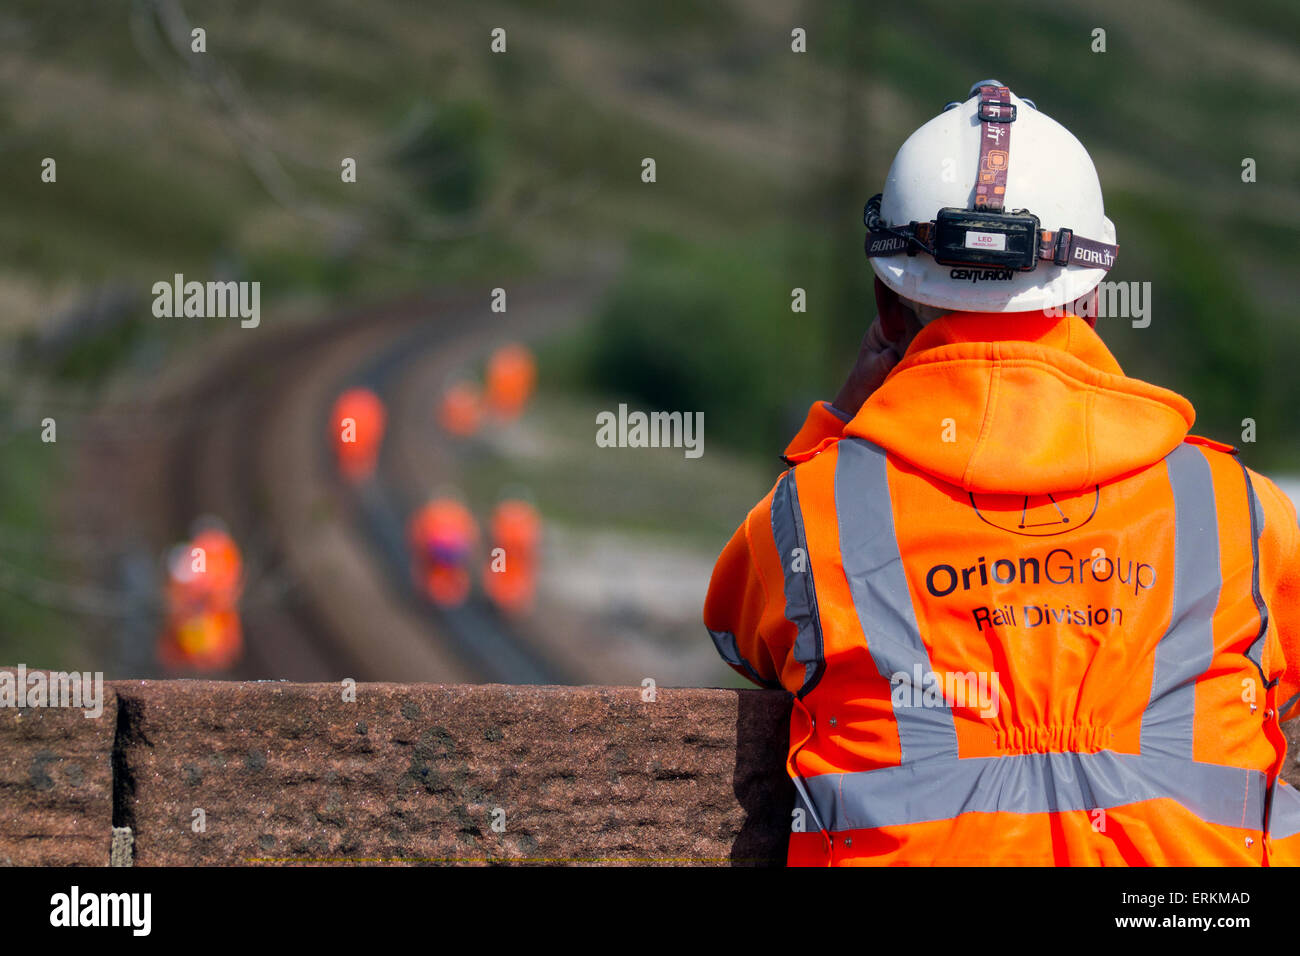 Orion Group Rail Division contractors in Tebay, Cumbria, UK June, 2015. Health and Safety observer for Men at Work. Network Rail Engineers on Settle Carlisle Line, working on rail track maintenance, rail engineer.  Inspectors, Safety engineers, employees, rail workers, workmen, renewing railway lines and Infrastructure surveyors inspecting & measuring the transport freight line track at the summit of Ais Gill. The railway's summit at 1,169 feet (356 metres) is north of Garsdale is the highest mainline in England,  and carries heavily loaded main line freight trains. Stock Photo